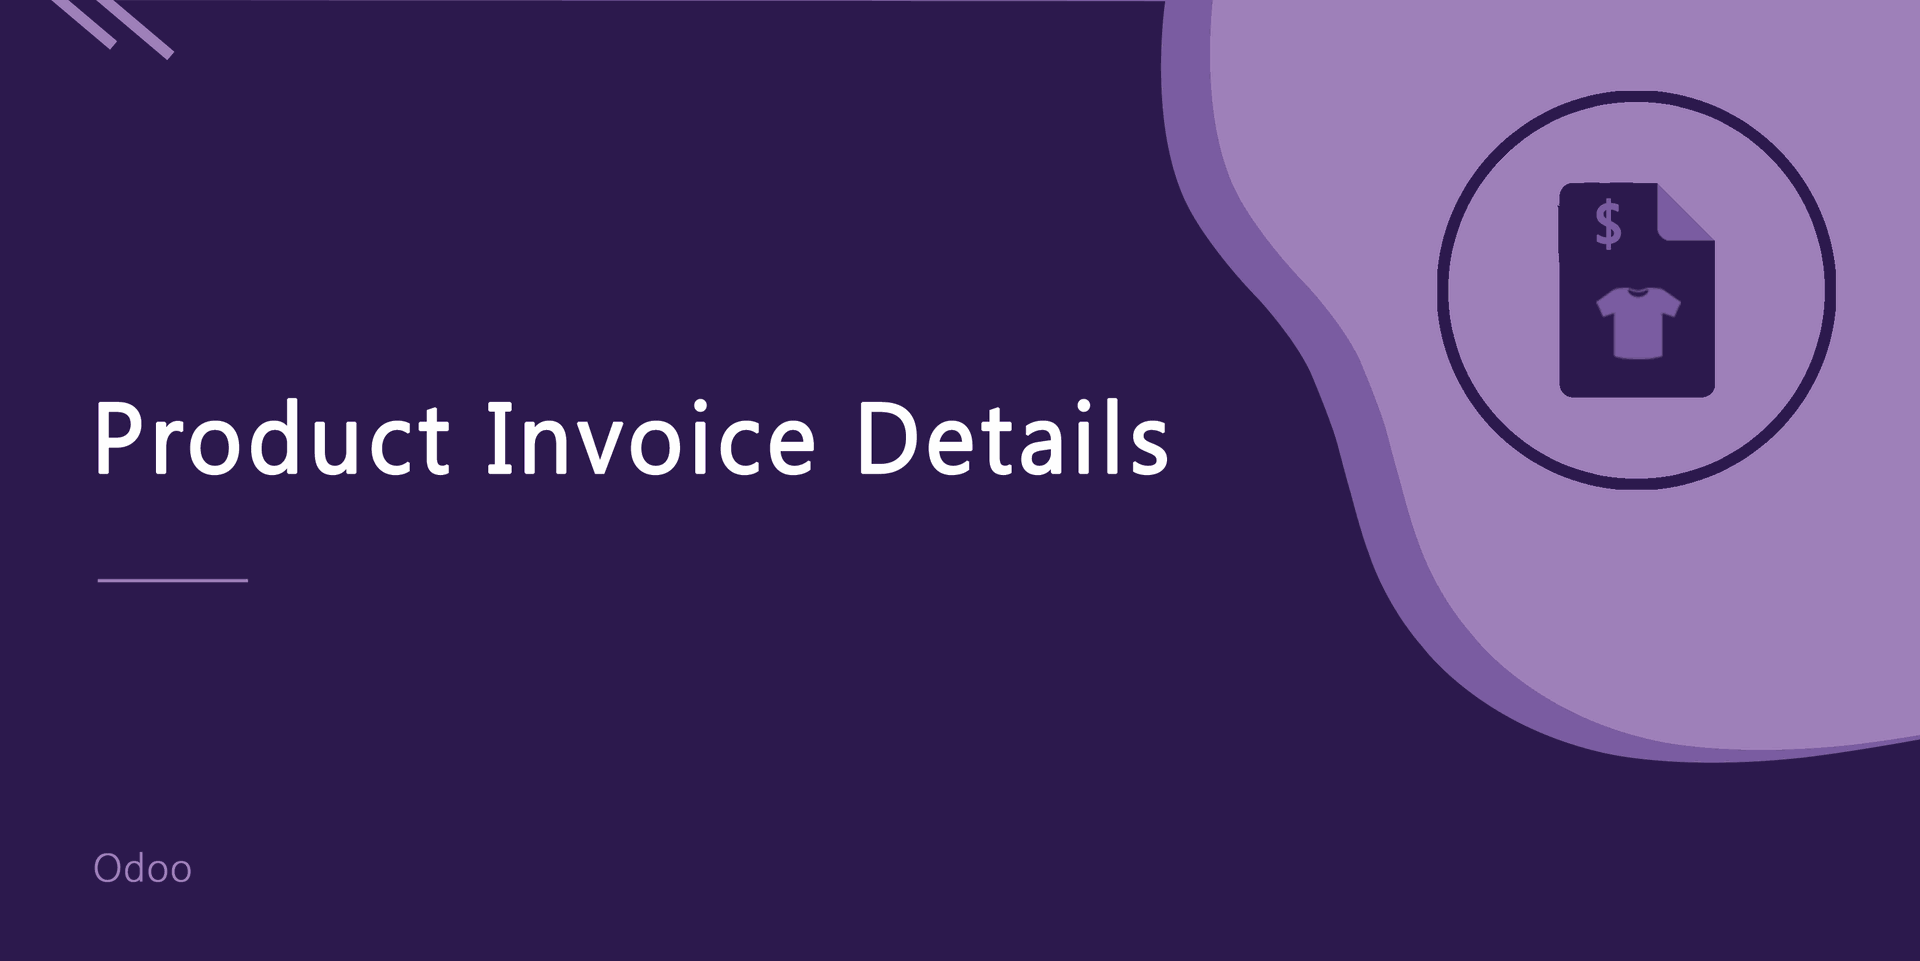 Product Invoice Details